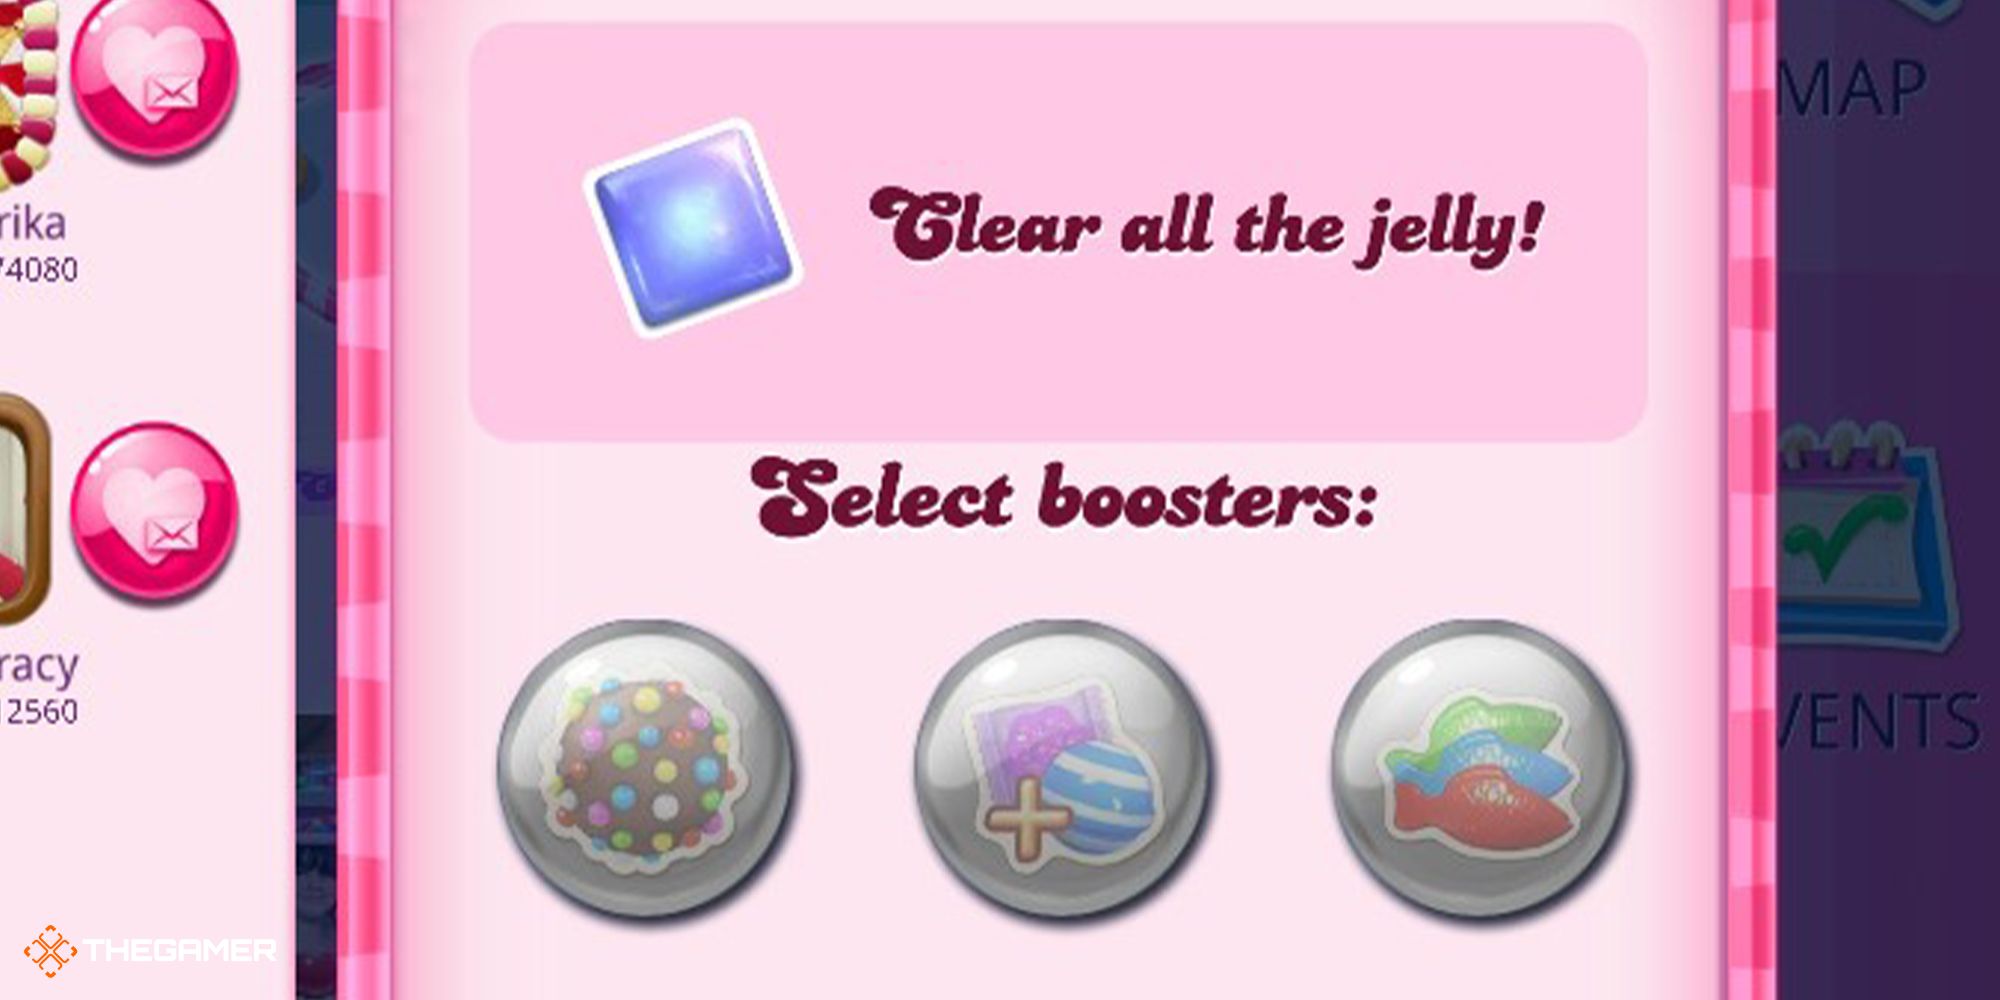 An in-game menu showing three different candy boosters to select